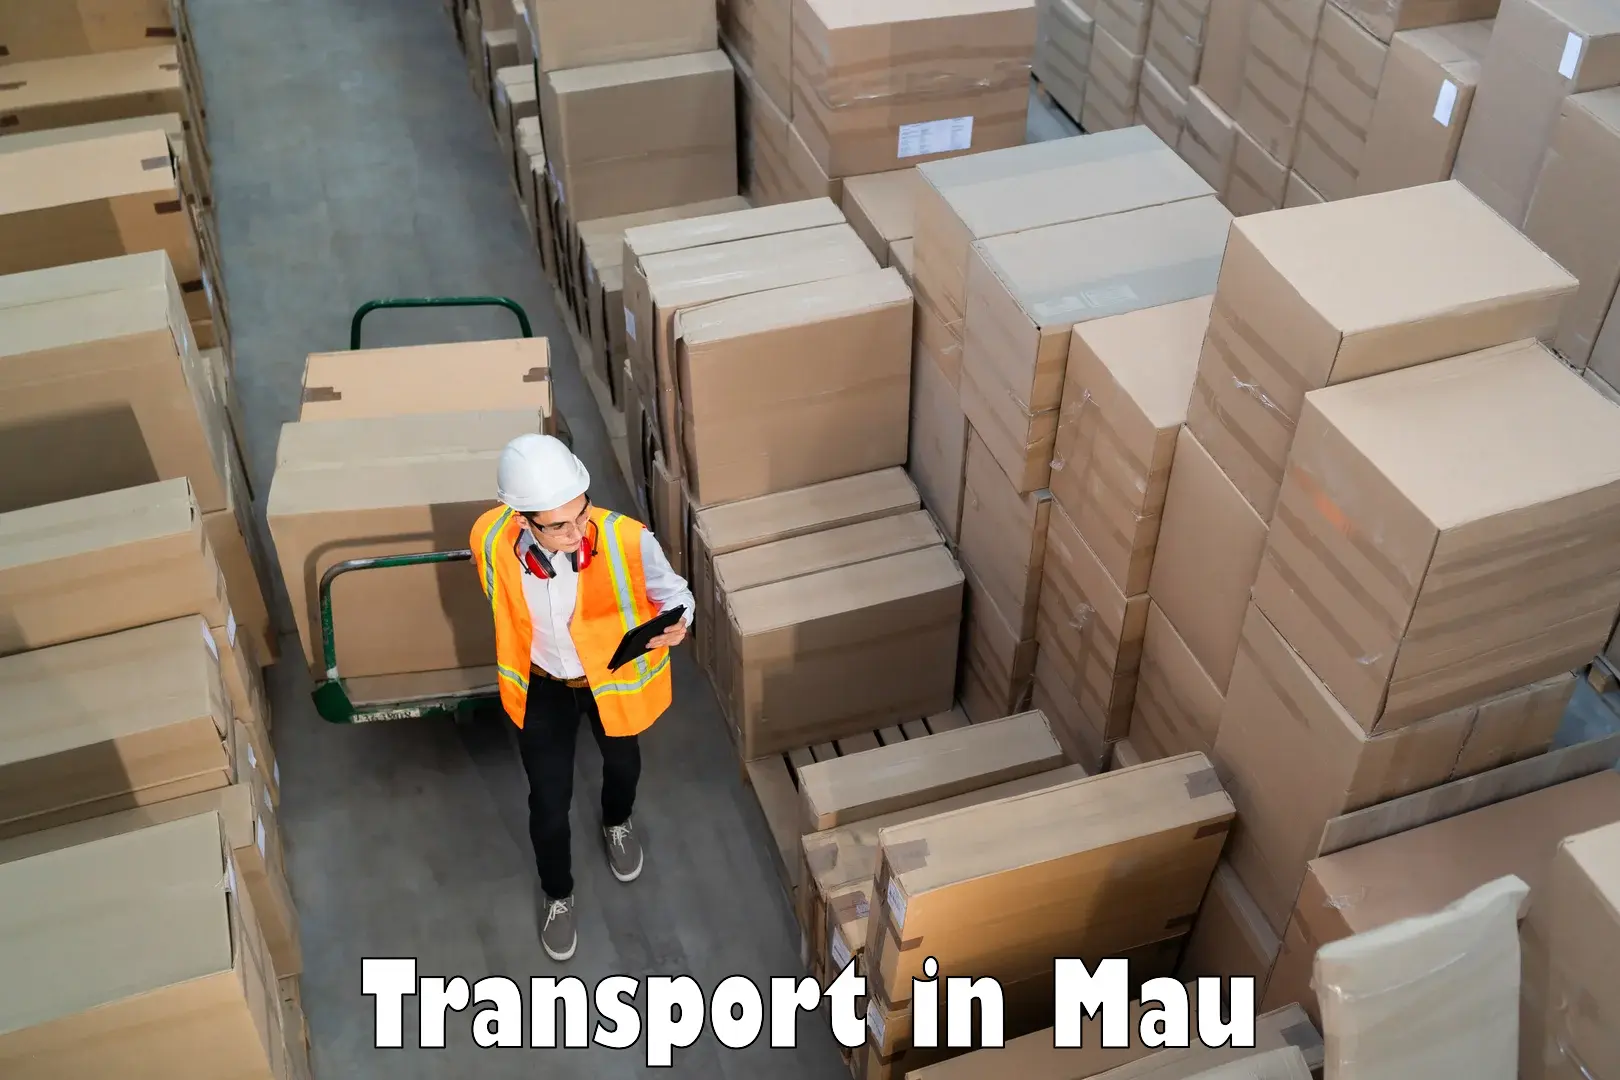 Express transport services in Mau